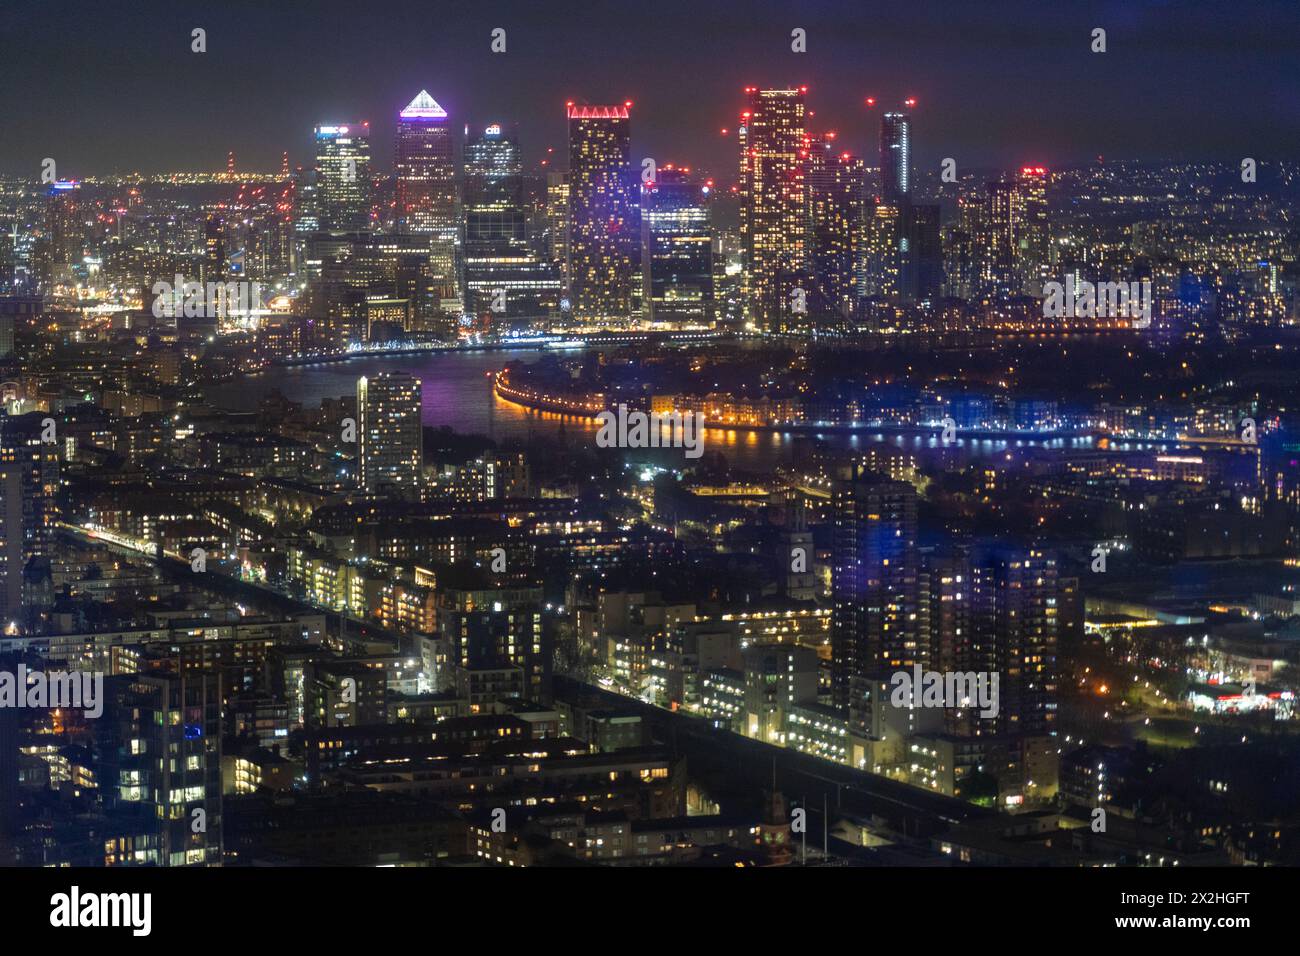 A view of Canary Wharf from the Gherkin in London. Photo date: Saturday, January 20, 2024. Photo: Richard Gray/Alamy Stock Photo